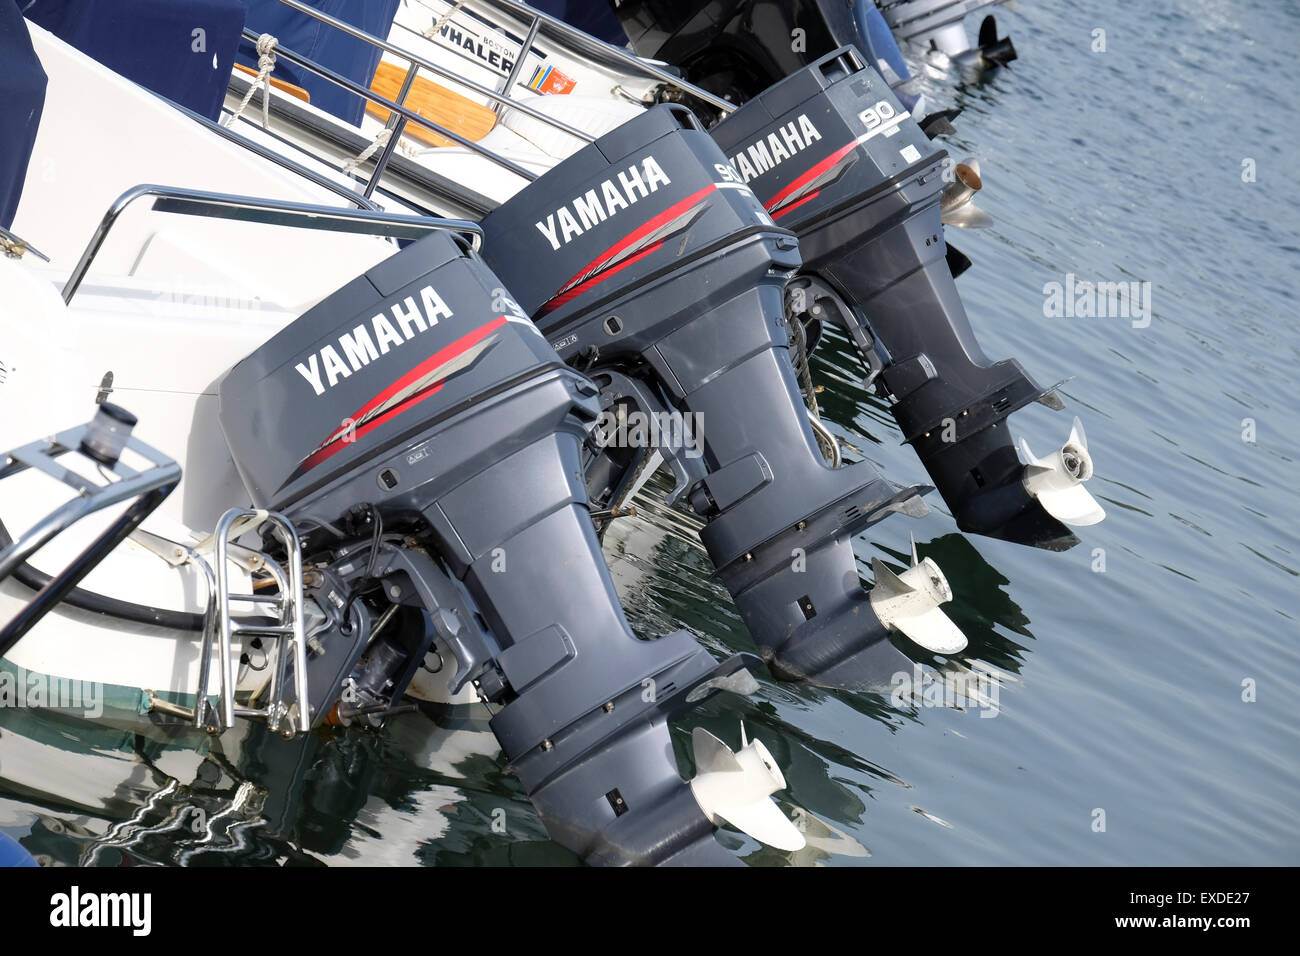 Yamaha motor Boat engines in a row at Salcombe in Devon Stock Photo